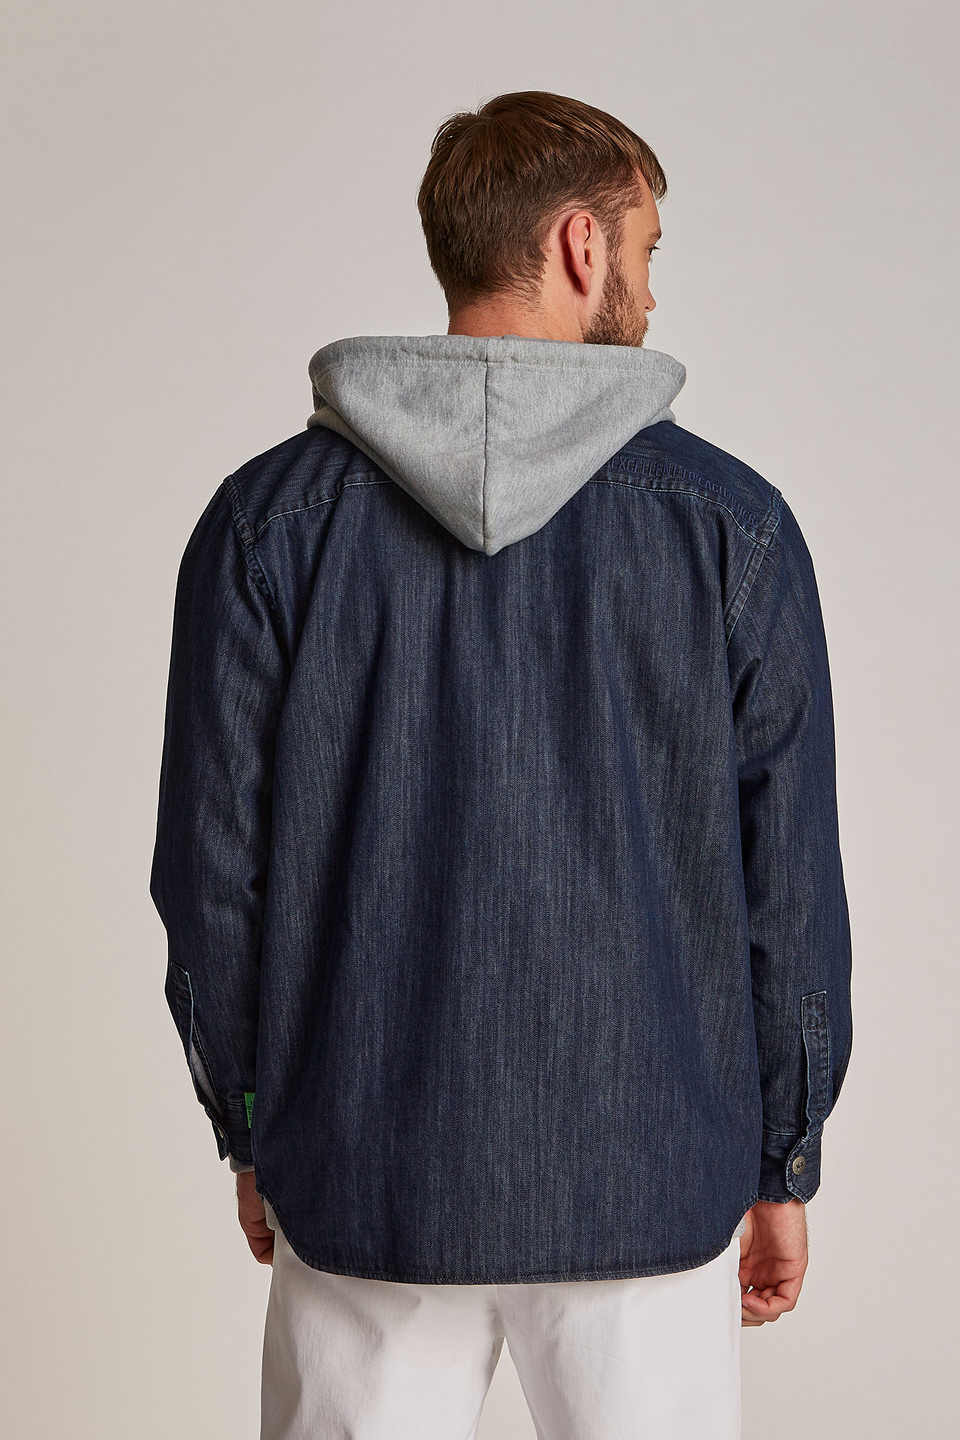 Men's oversized hooded jacket in 100% cotton fabric | La Martina - Official Online Shop